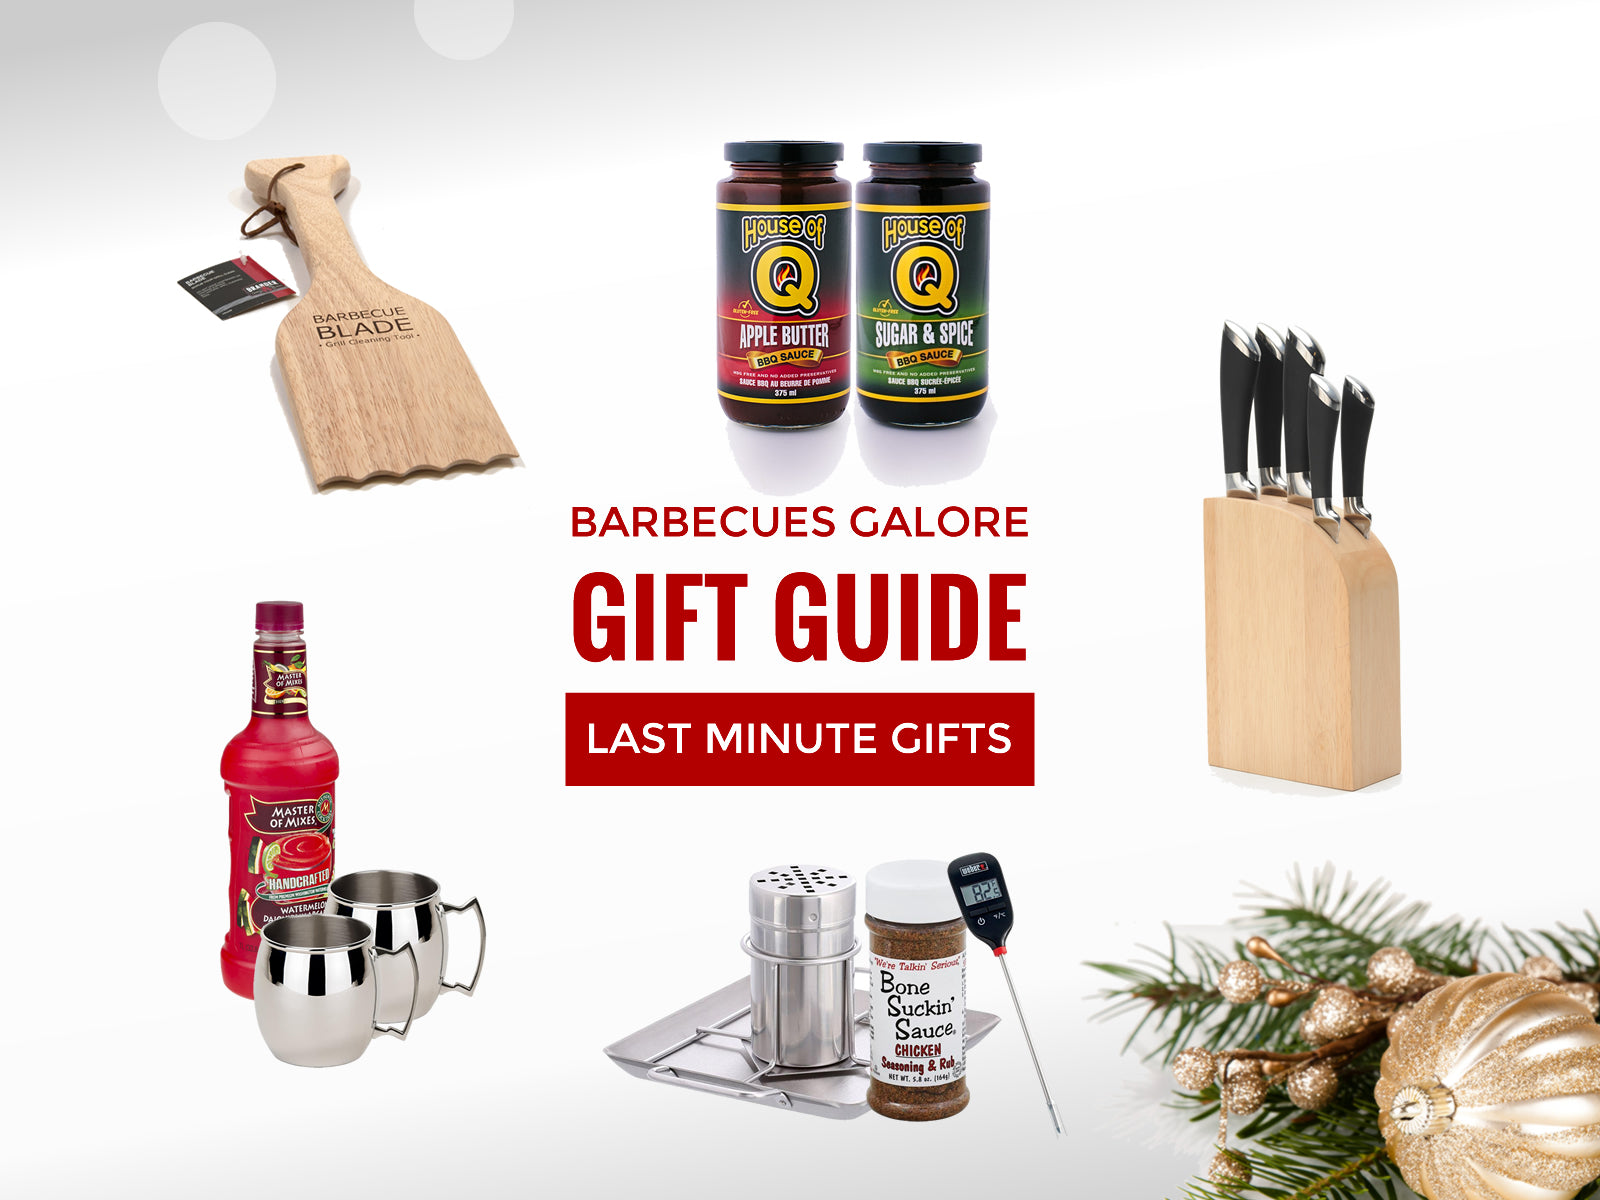 Barbecues Galore Gift Guide - Last Minute Gifts